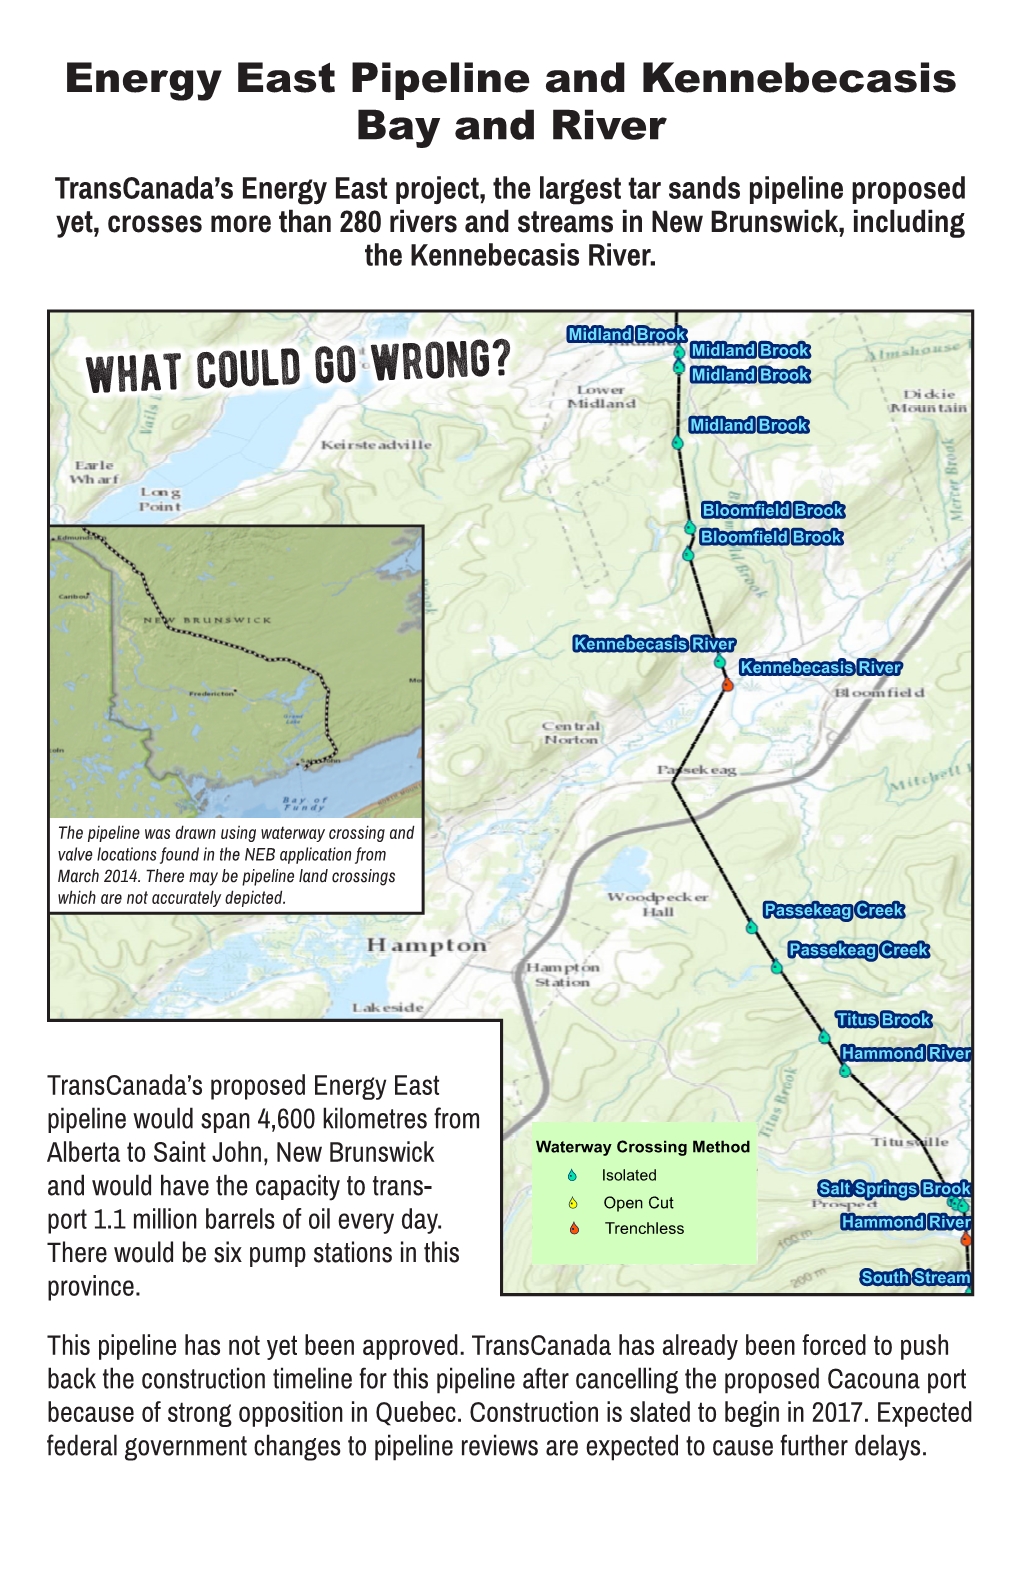 What Does Energy East Mean for Kennebecasis Bay and River?